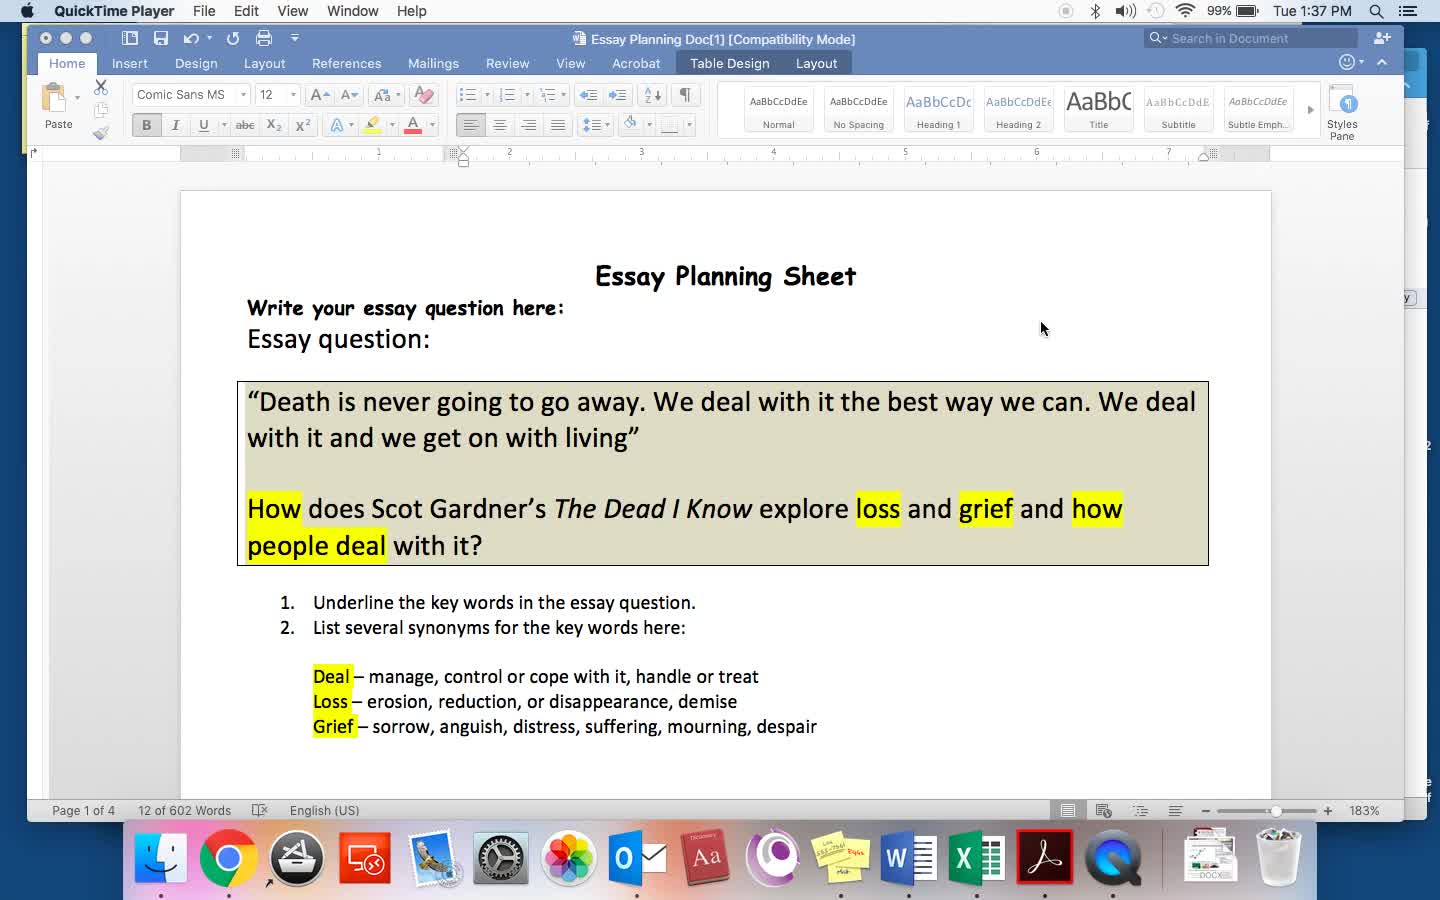 The Dead I Know essay planning